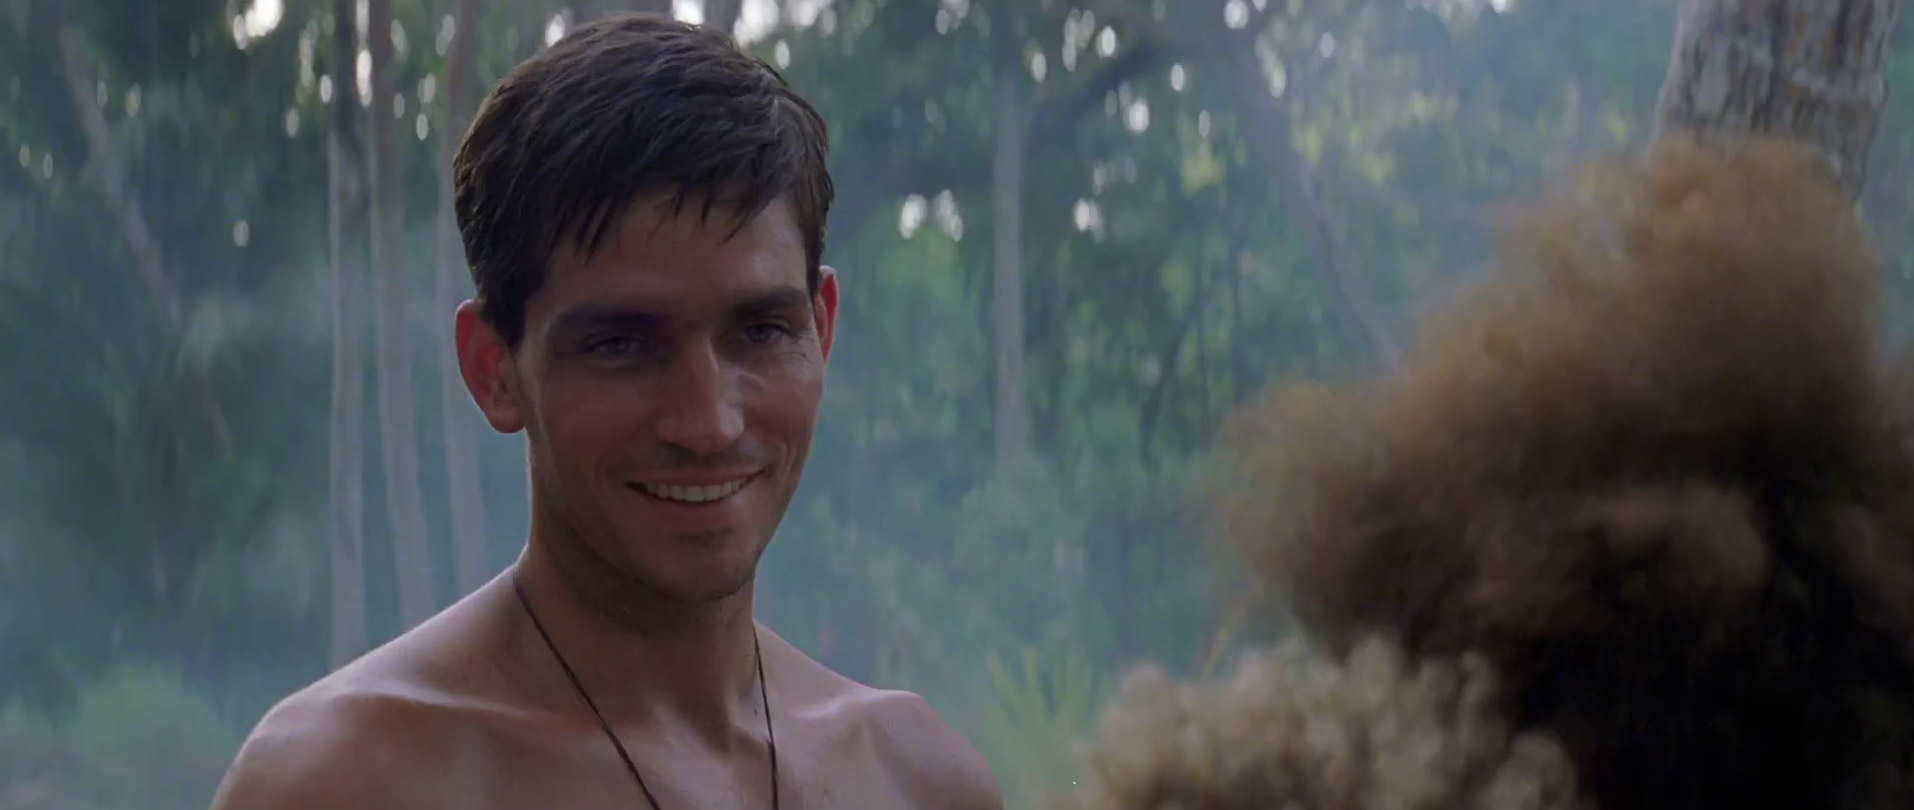 Jim Caviezel in The Thin Red Line (1998). 